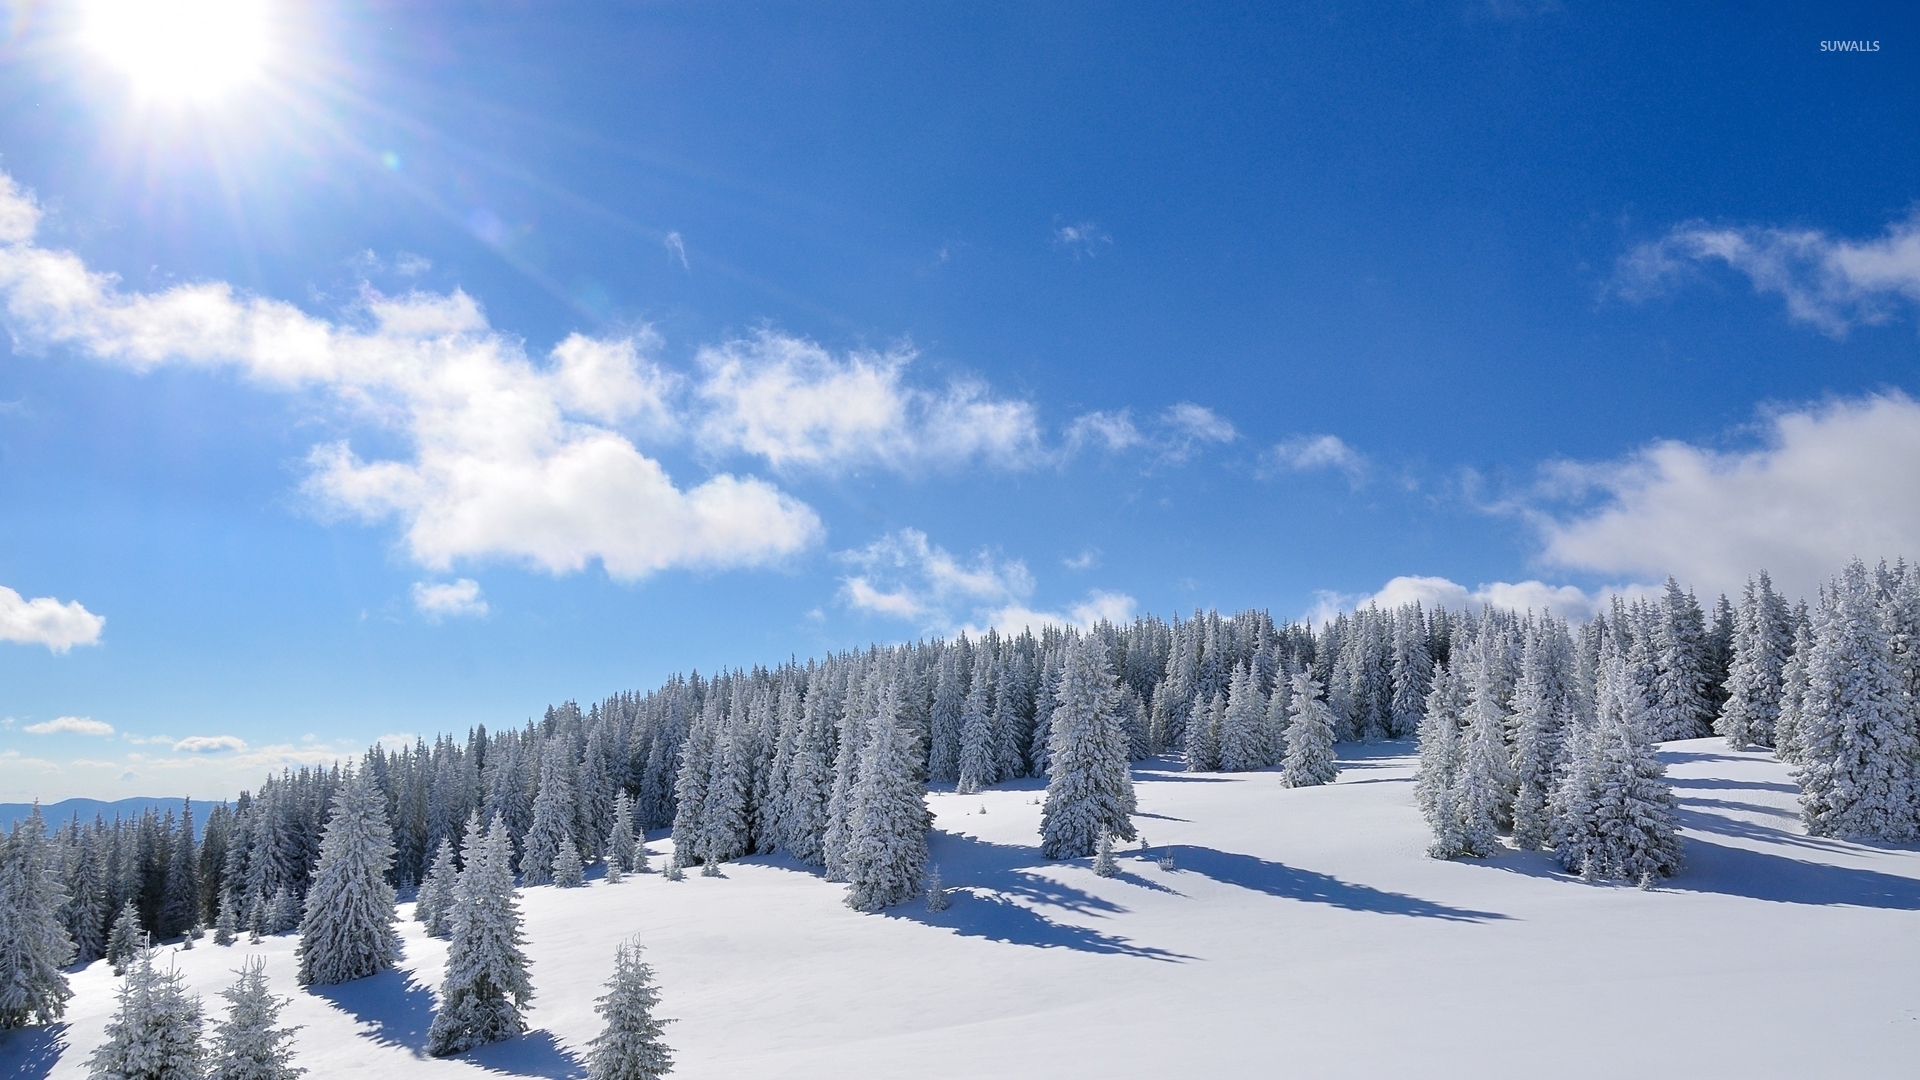 Sun Over The Snowy Forest Wallpaper - Snow Forest Full Hd - HD Wallpaper 